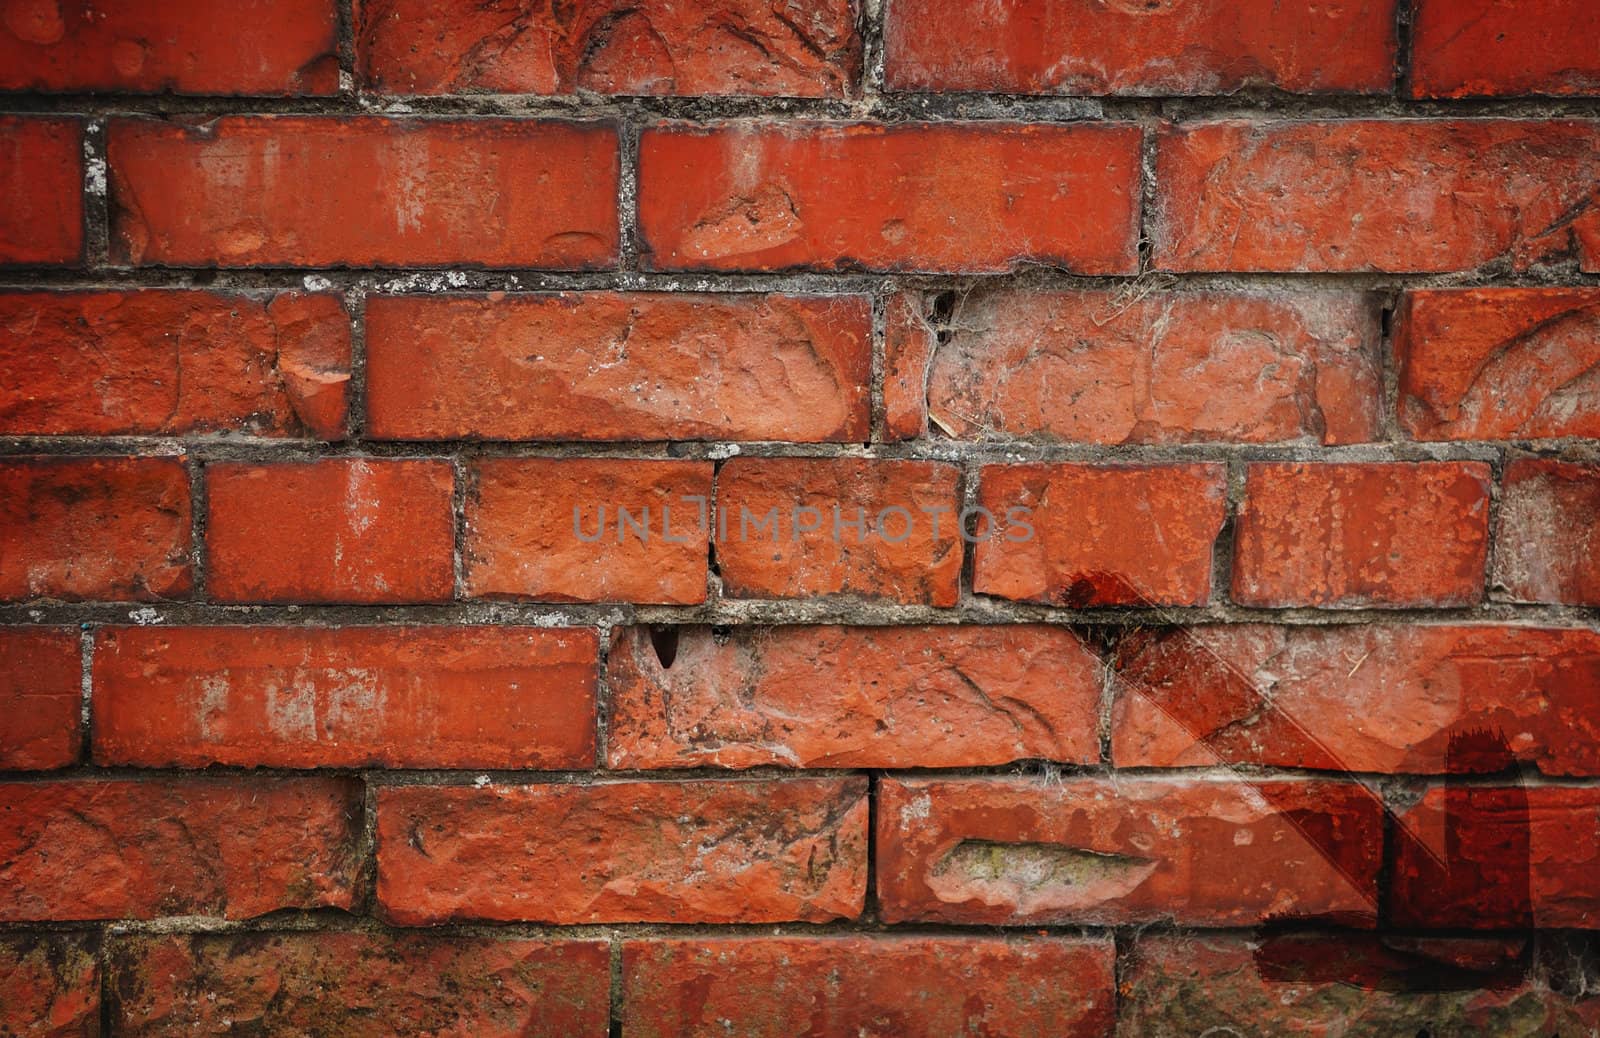 Old brick texture with arrow embellishment added